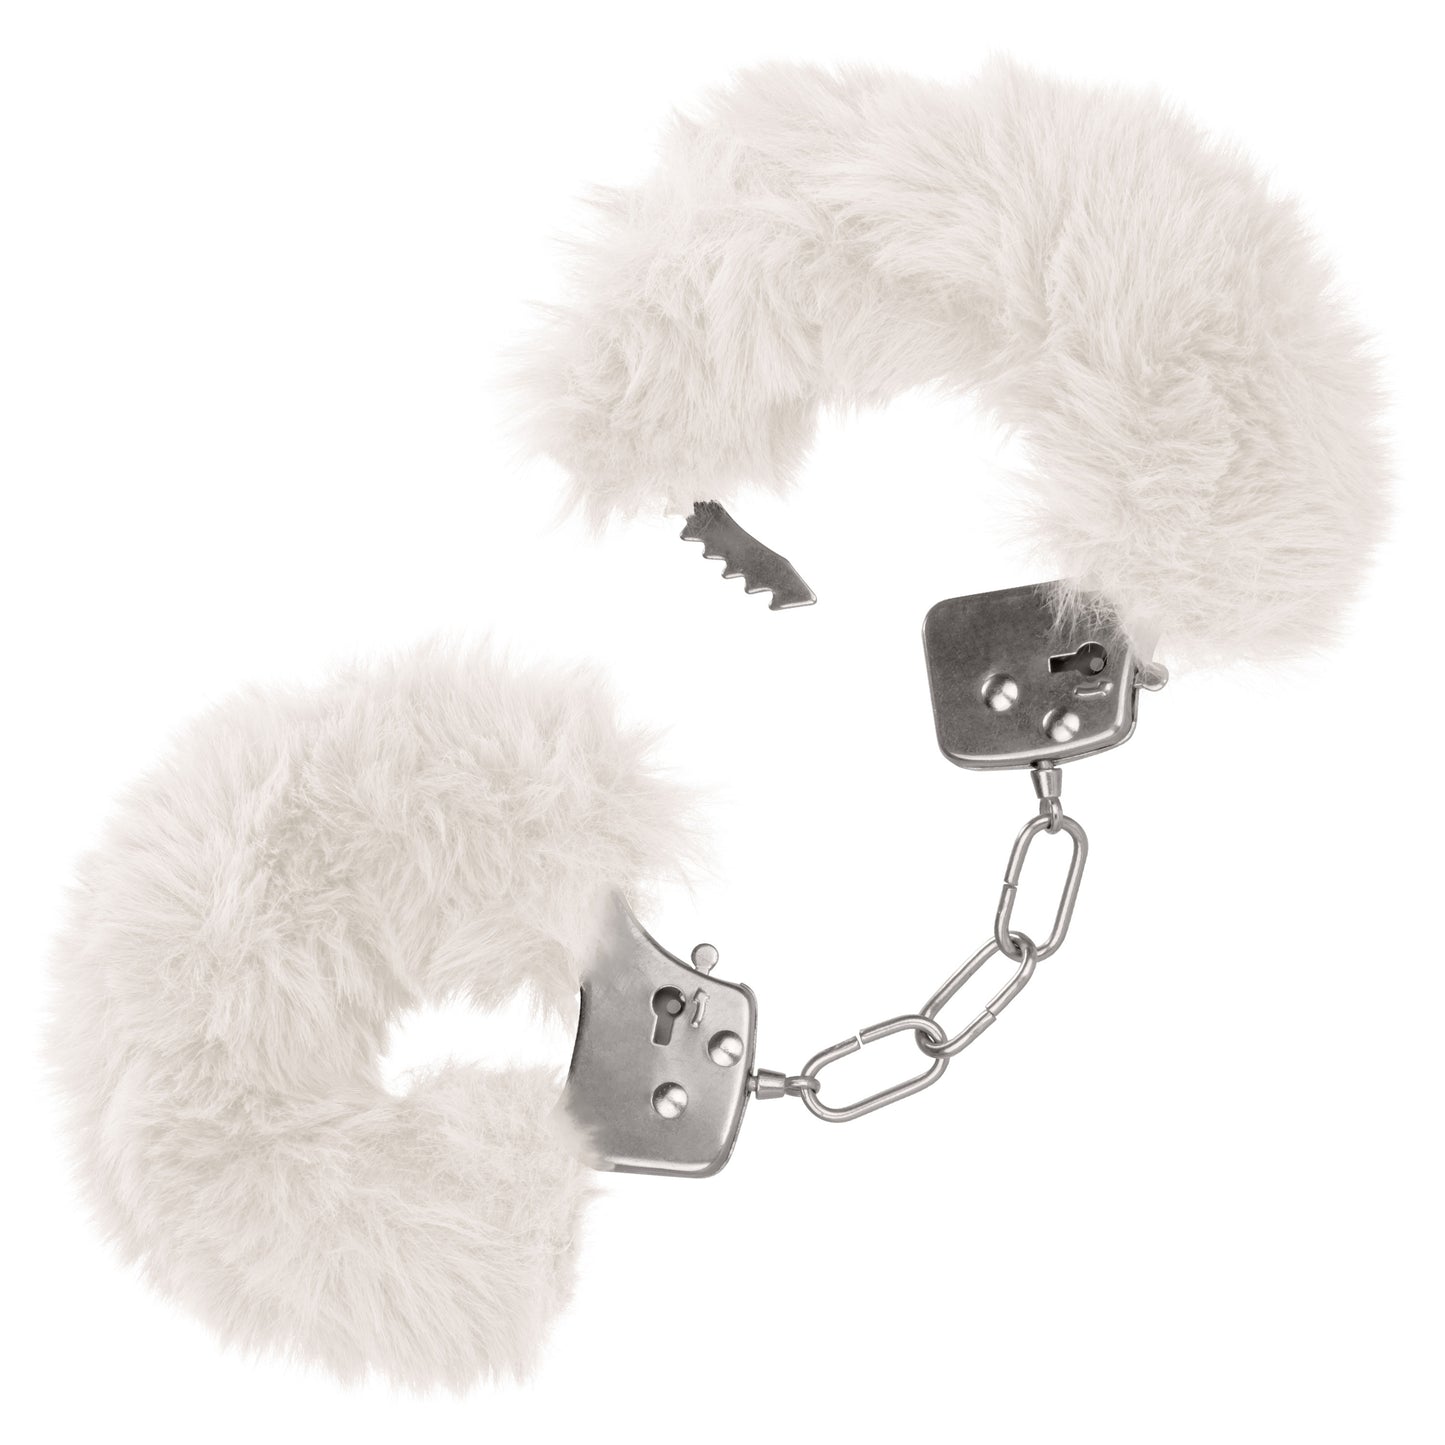 Ultra Fluffy Furry Cuffs - Collection